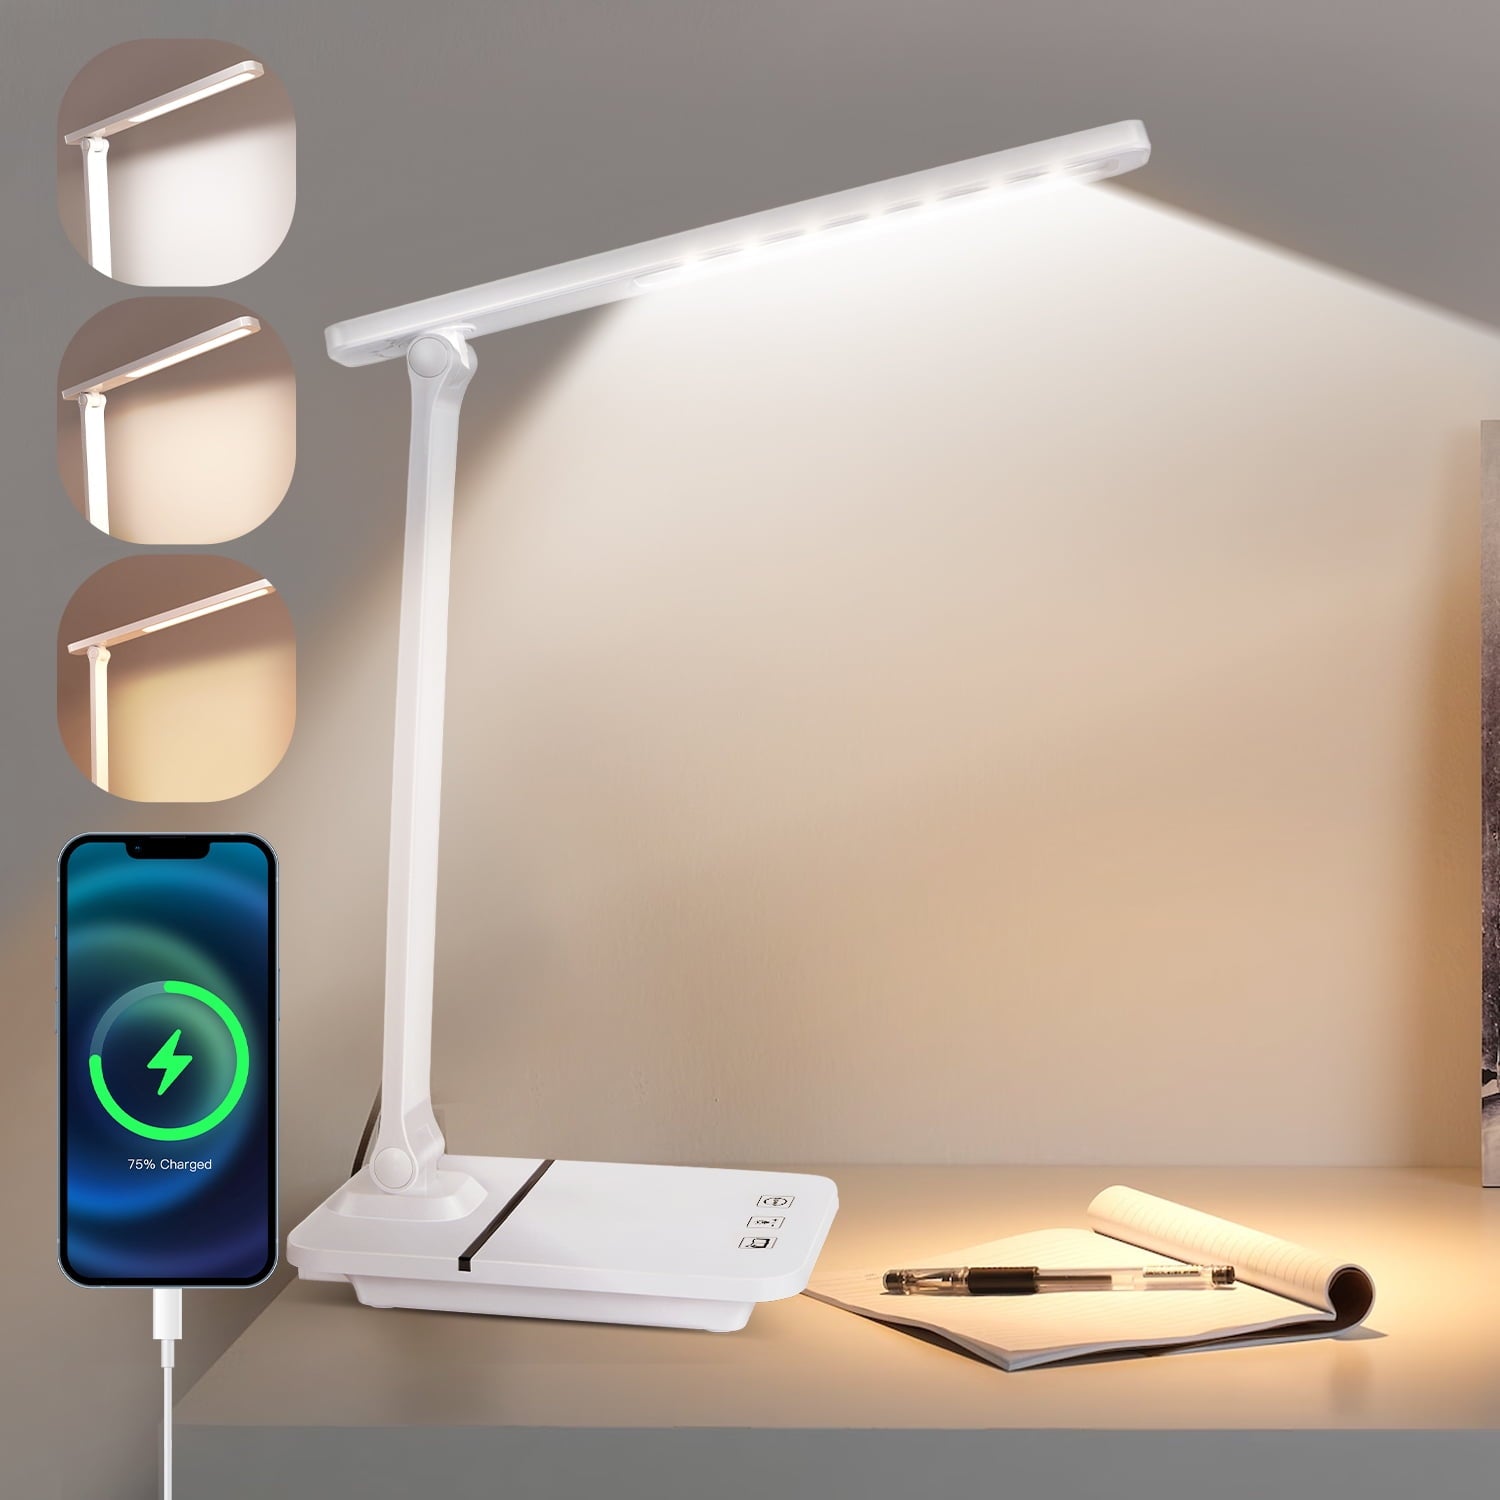 iFanze LED Desk Lamp, Eye-Caring Table Lamp 3 Color Modes with Stepless Dimming, Touch Control,Reading Mode, 2500mAh Rechargeable Battery Operated Night Light for Home Bedroom Outdoor Patio